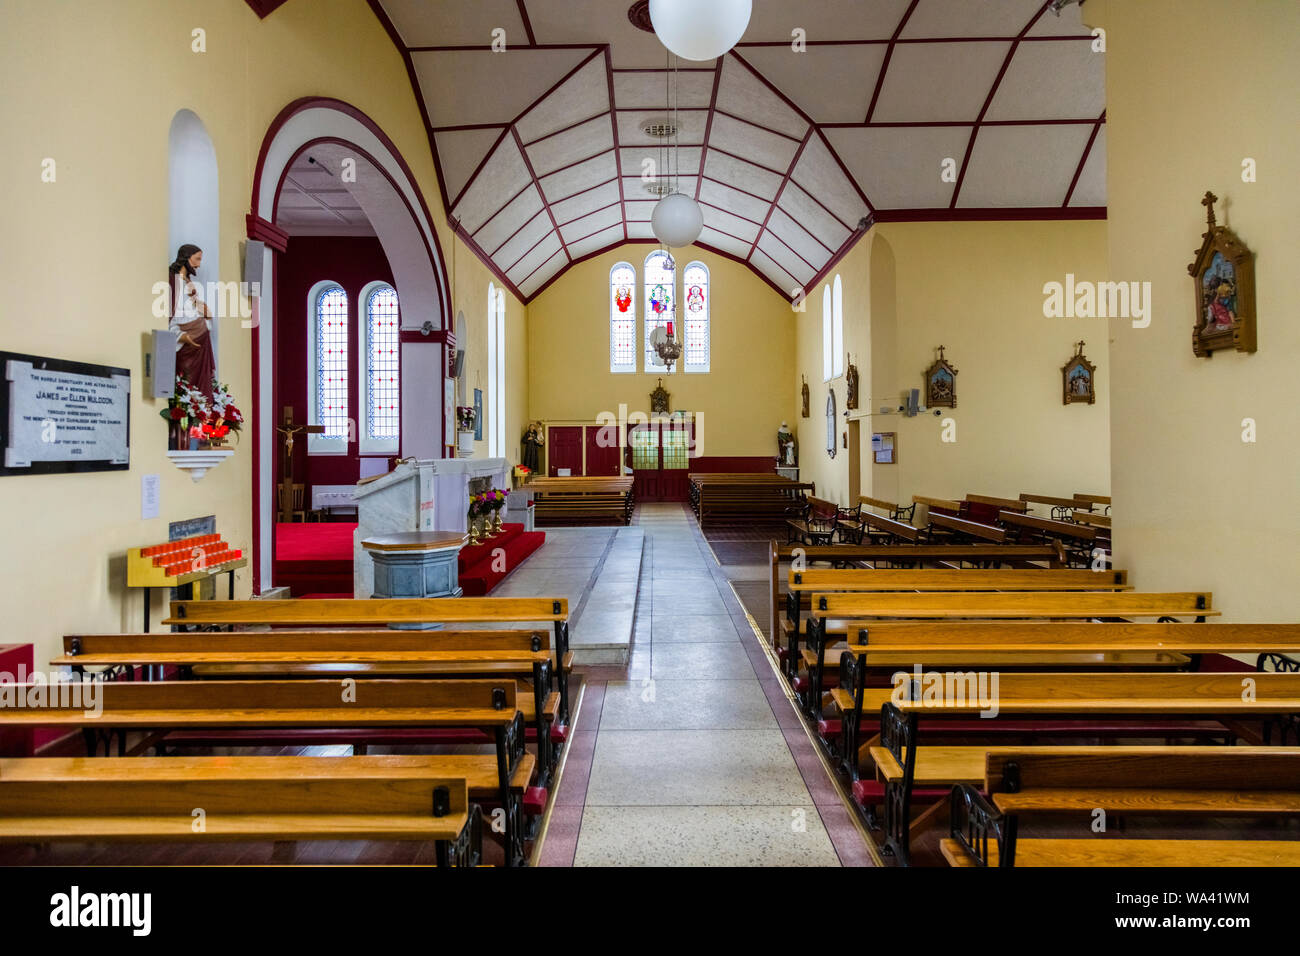 Interior of St Patricks Church in the village of Aghagower in County Mayo Ireland Stock Photo